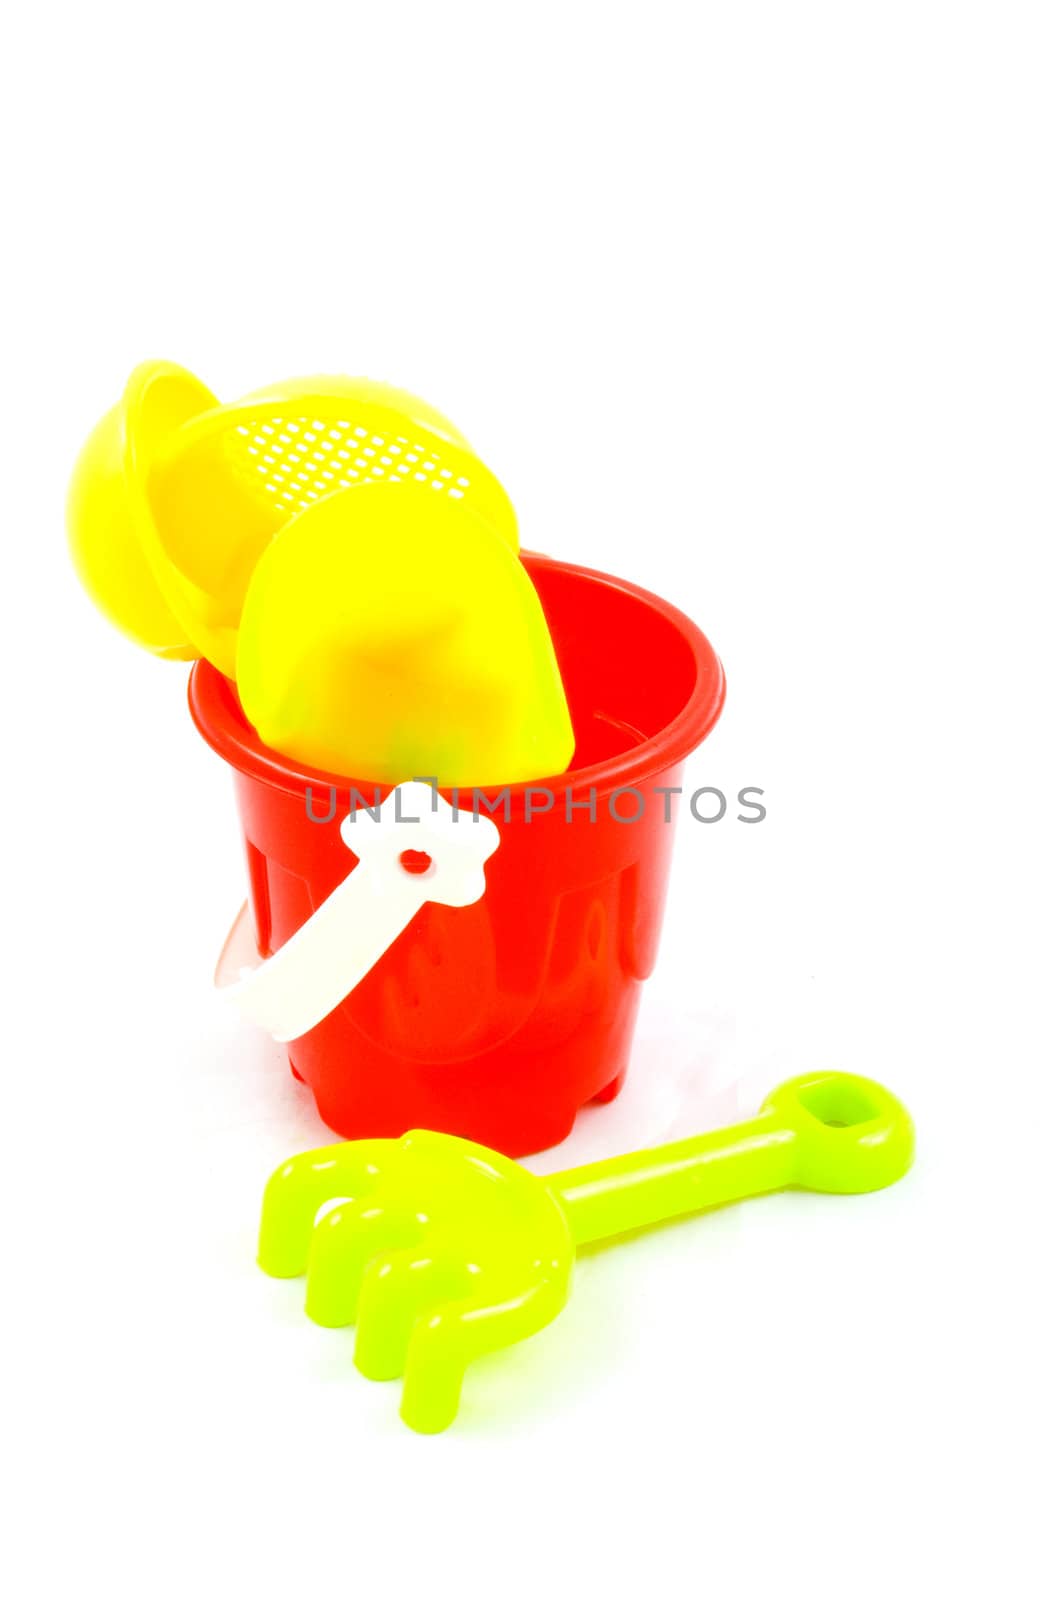 Red bucket and toys, isolated on white background by ladyminnie